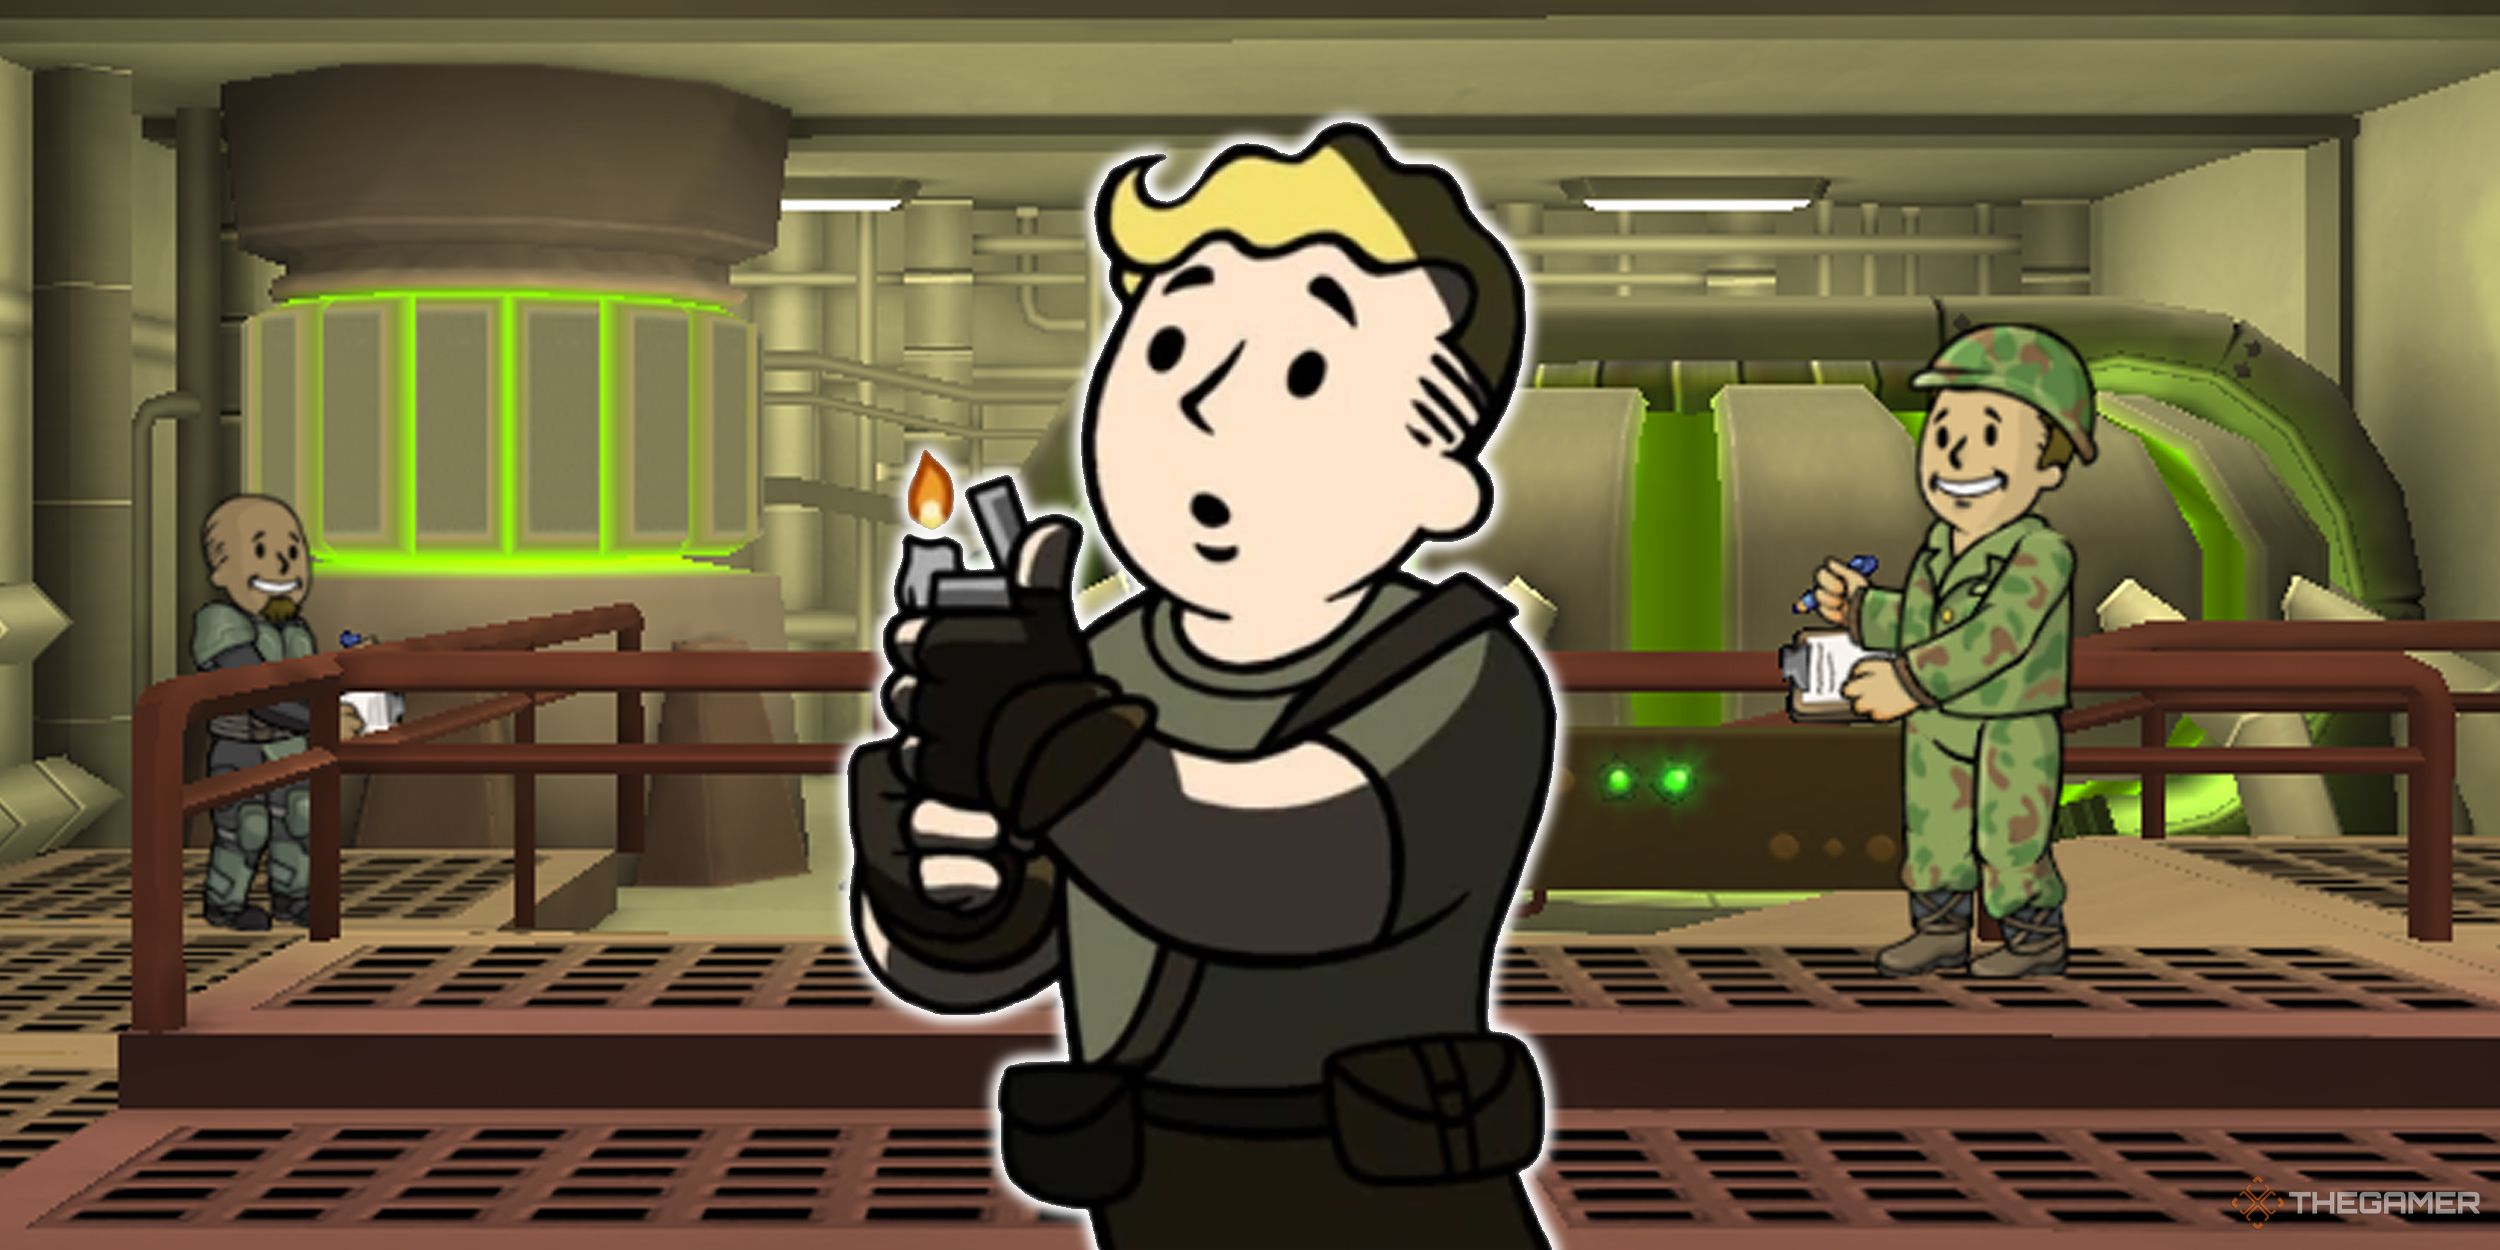 Fallout Shelter Vault Boy lighting a candle in the nuclear reactor